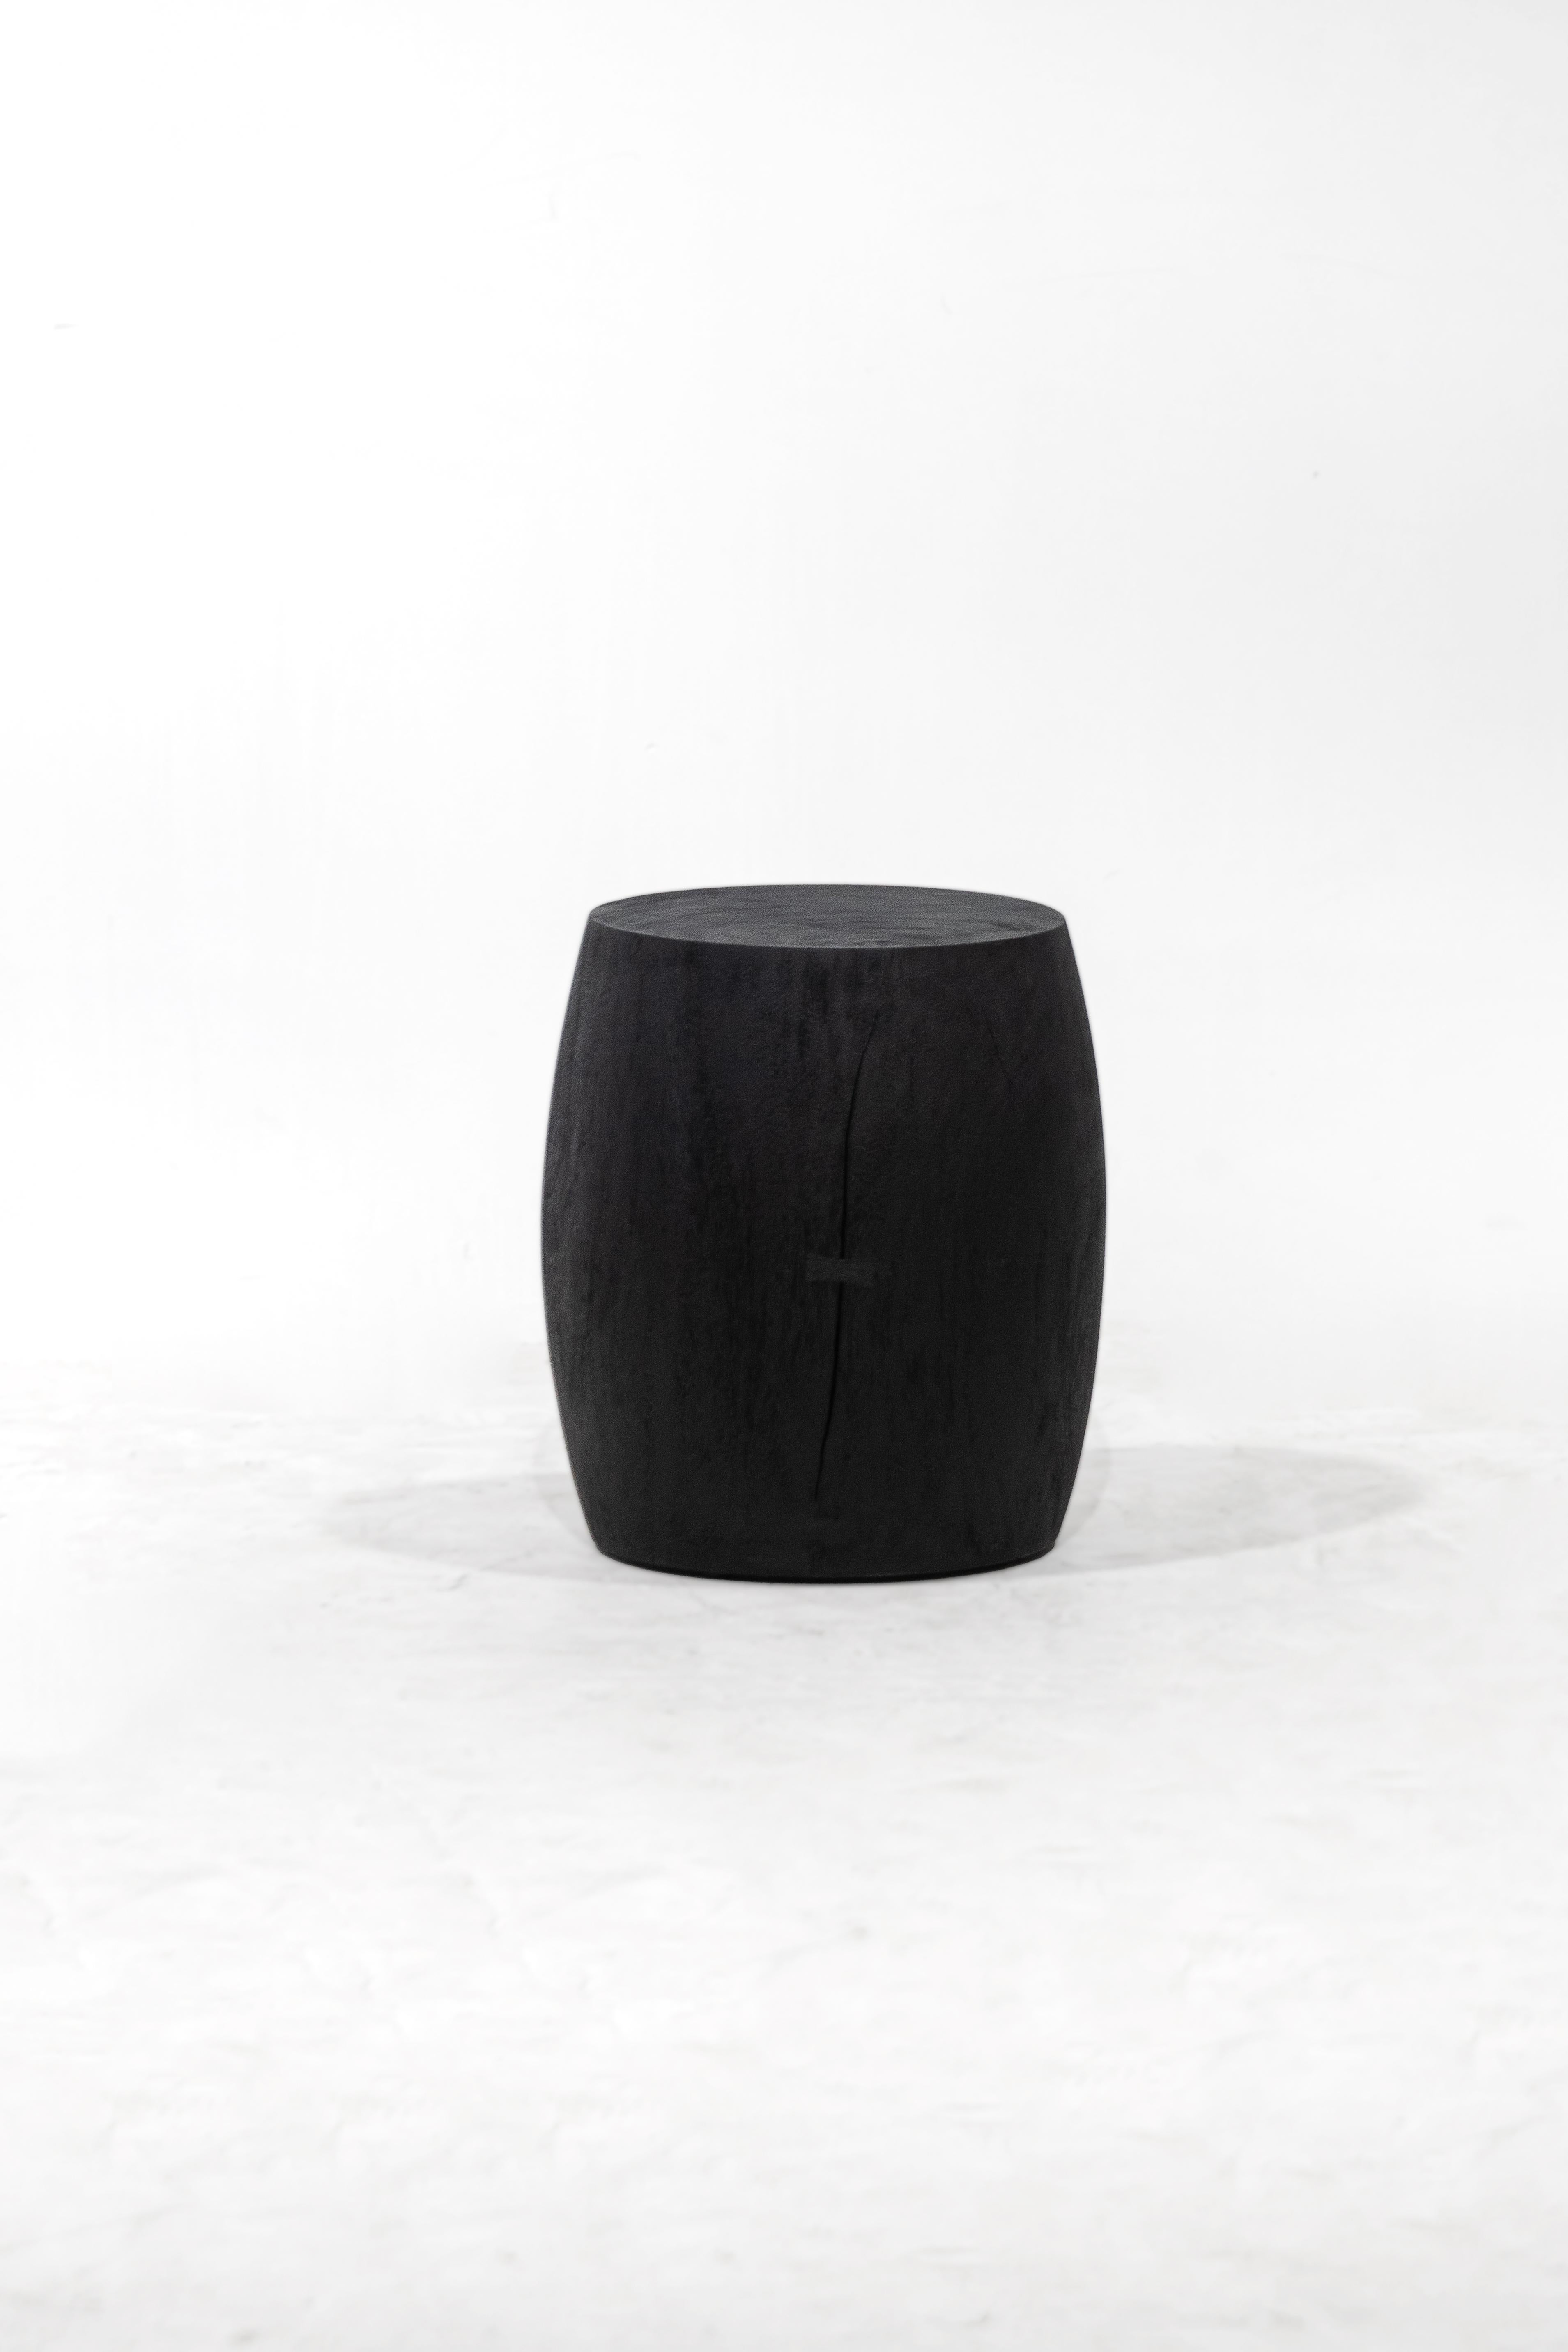 Arts and Crafts GROM stool, Rough Black Monkey Pod finishing For Sale